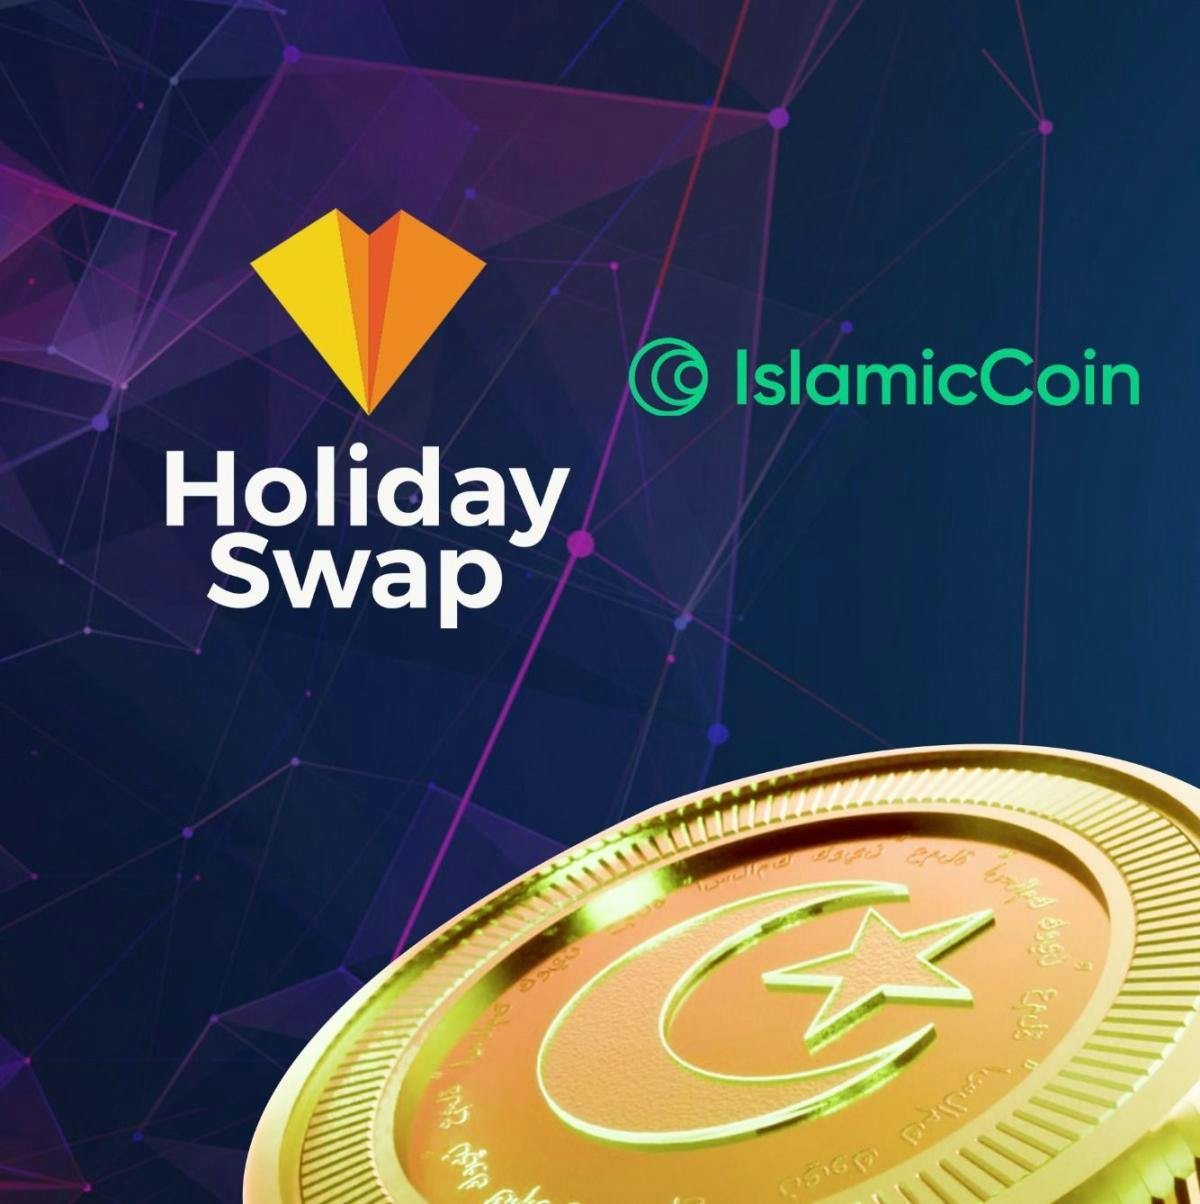 Web2 to Web3: Haqq and Holiday Swap Announce Partnership Launch